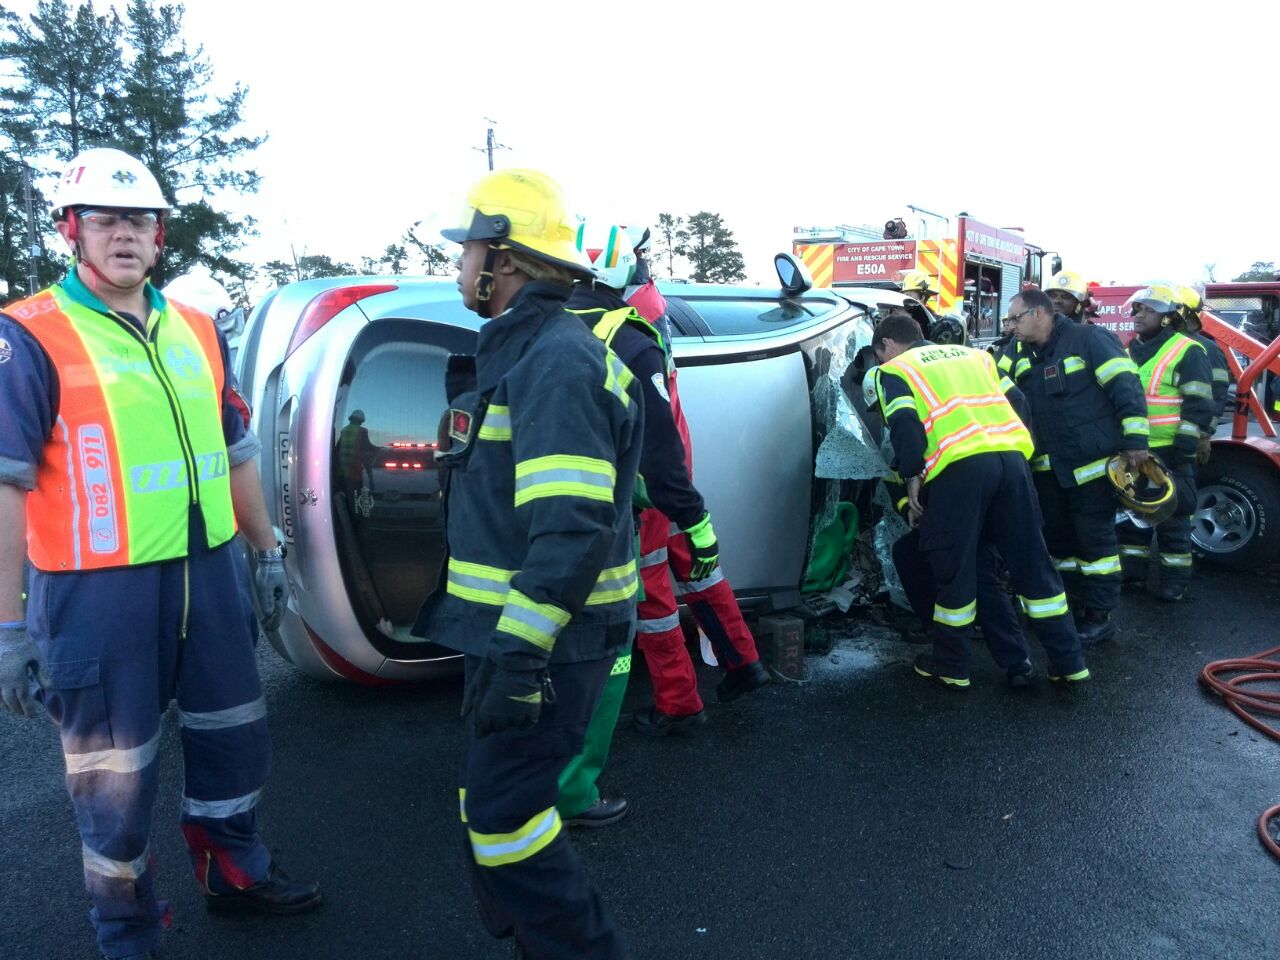 Woman injured in collision with truck near Winery road in Stellenbosch